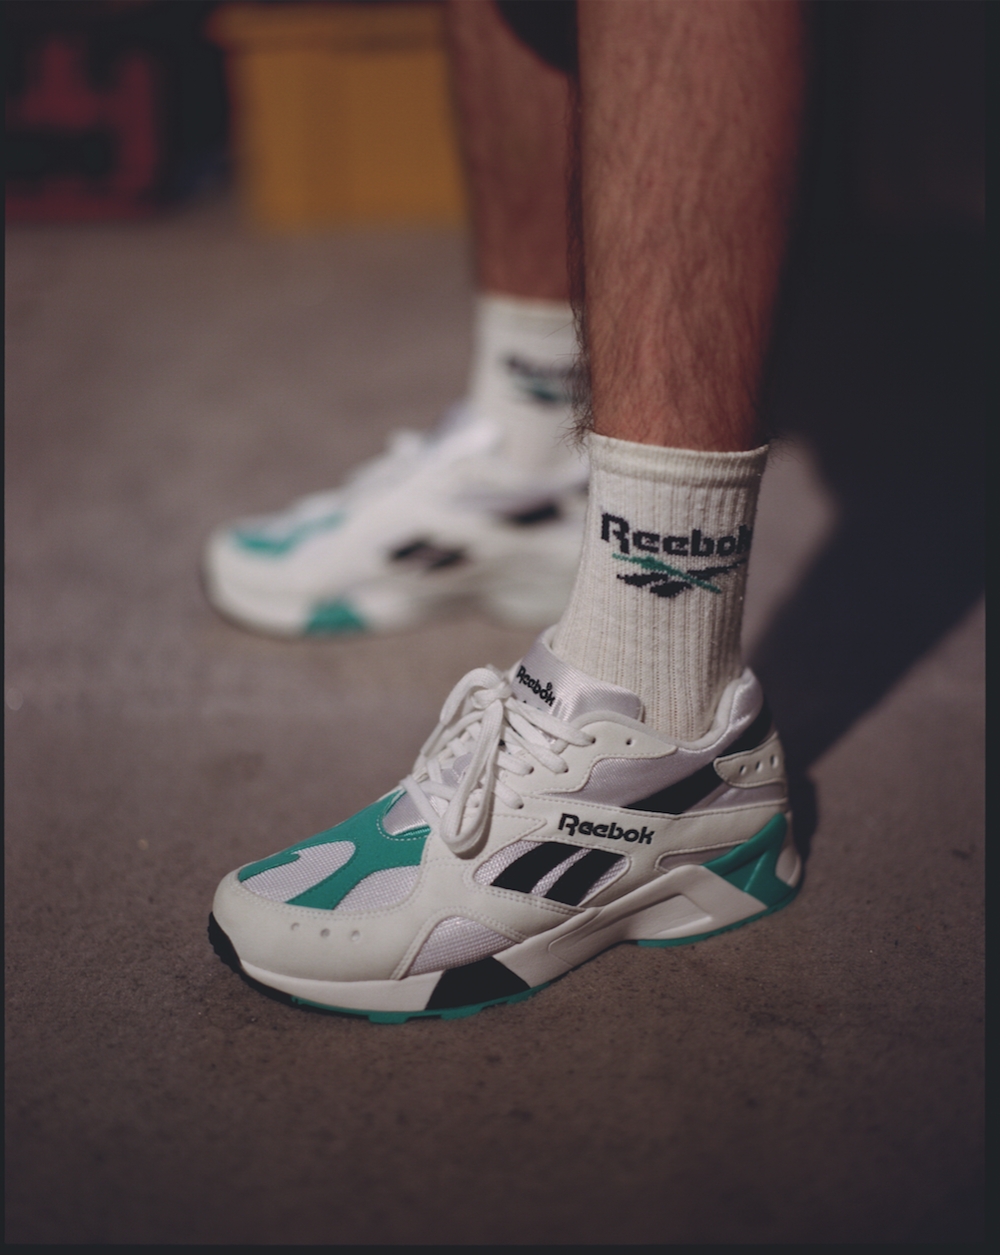 Reebok Classic launches campaign that champions the 90s spirit DSTNGR